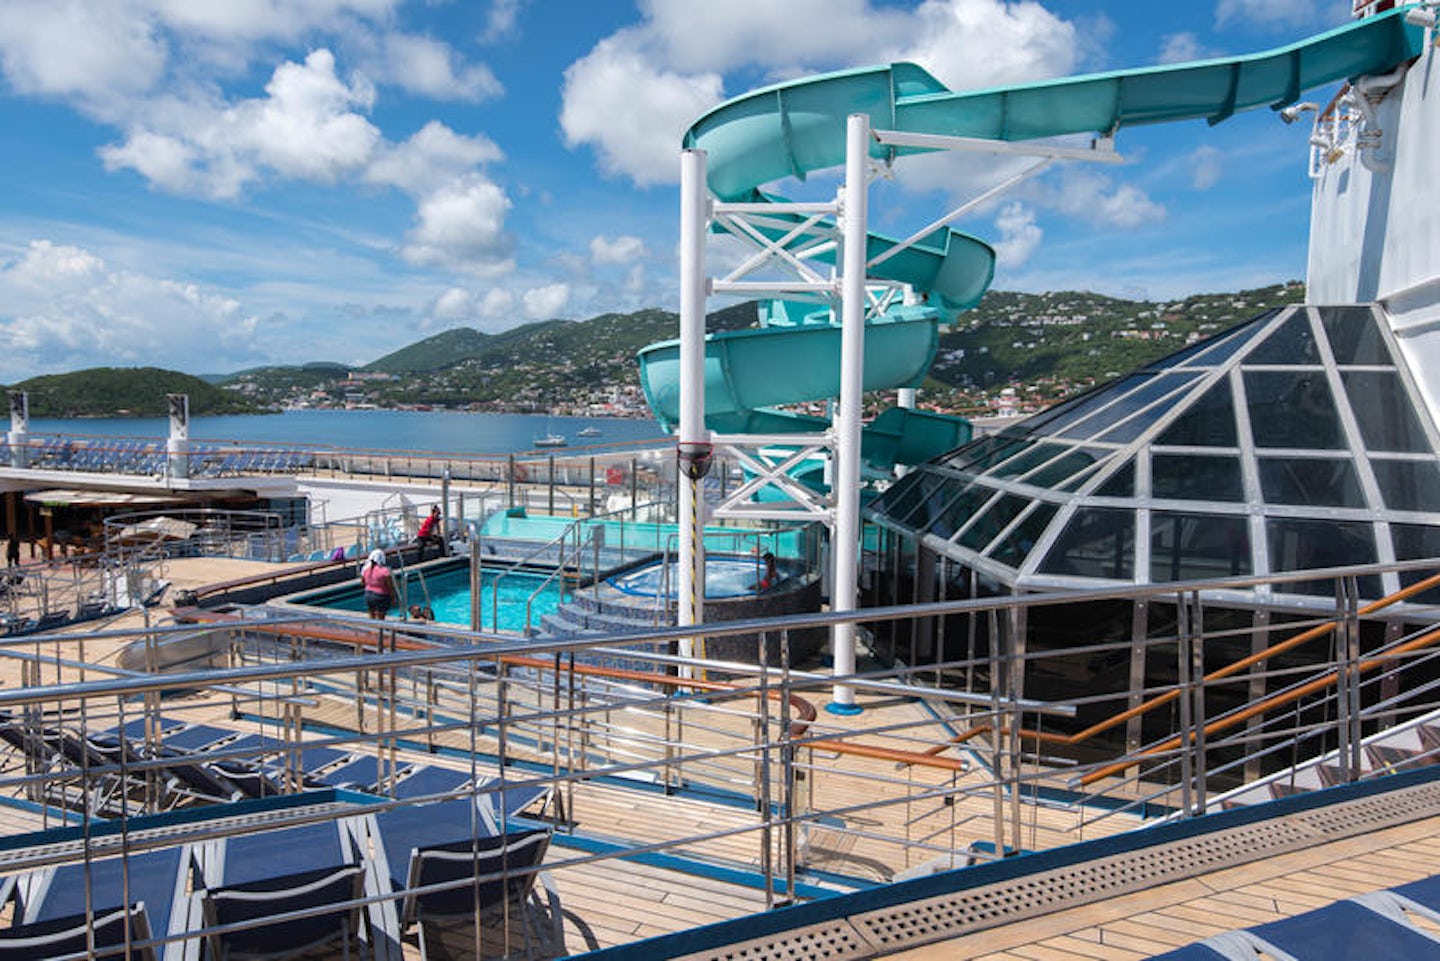 The Coney Island Pool on Carnival Liberty